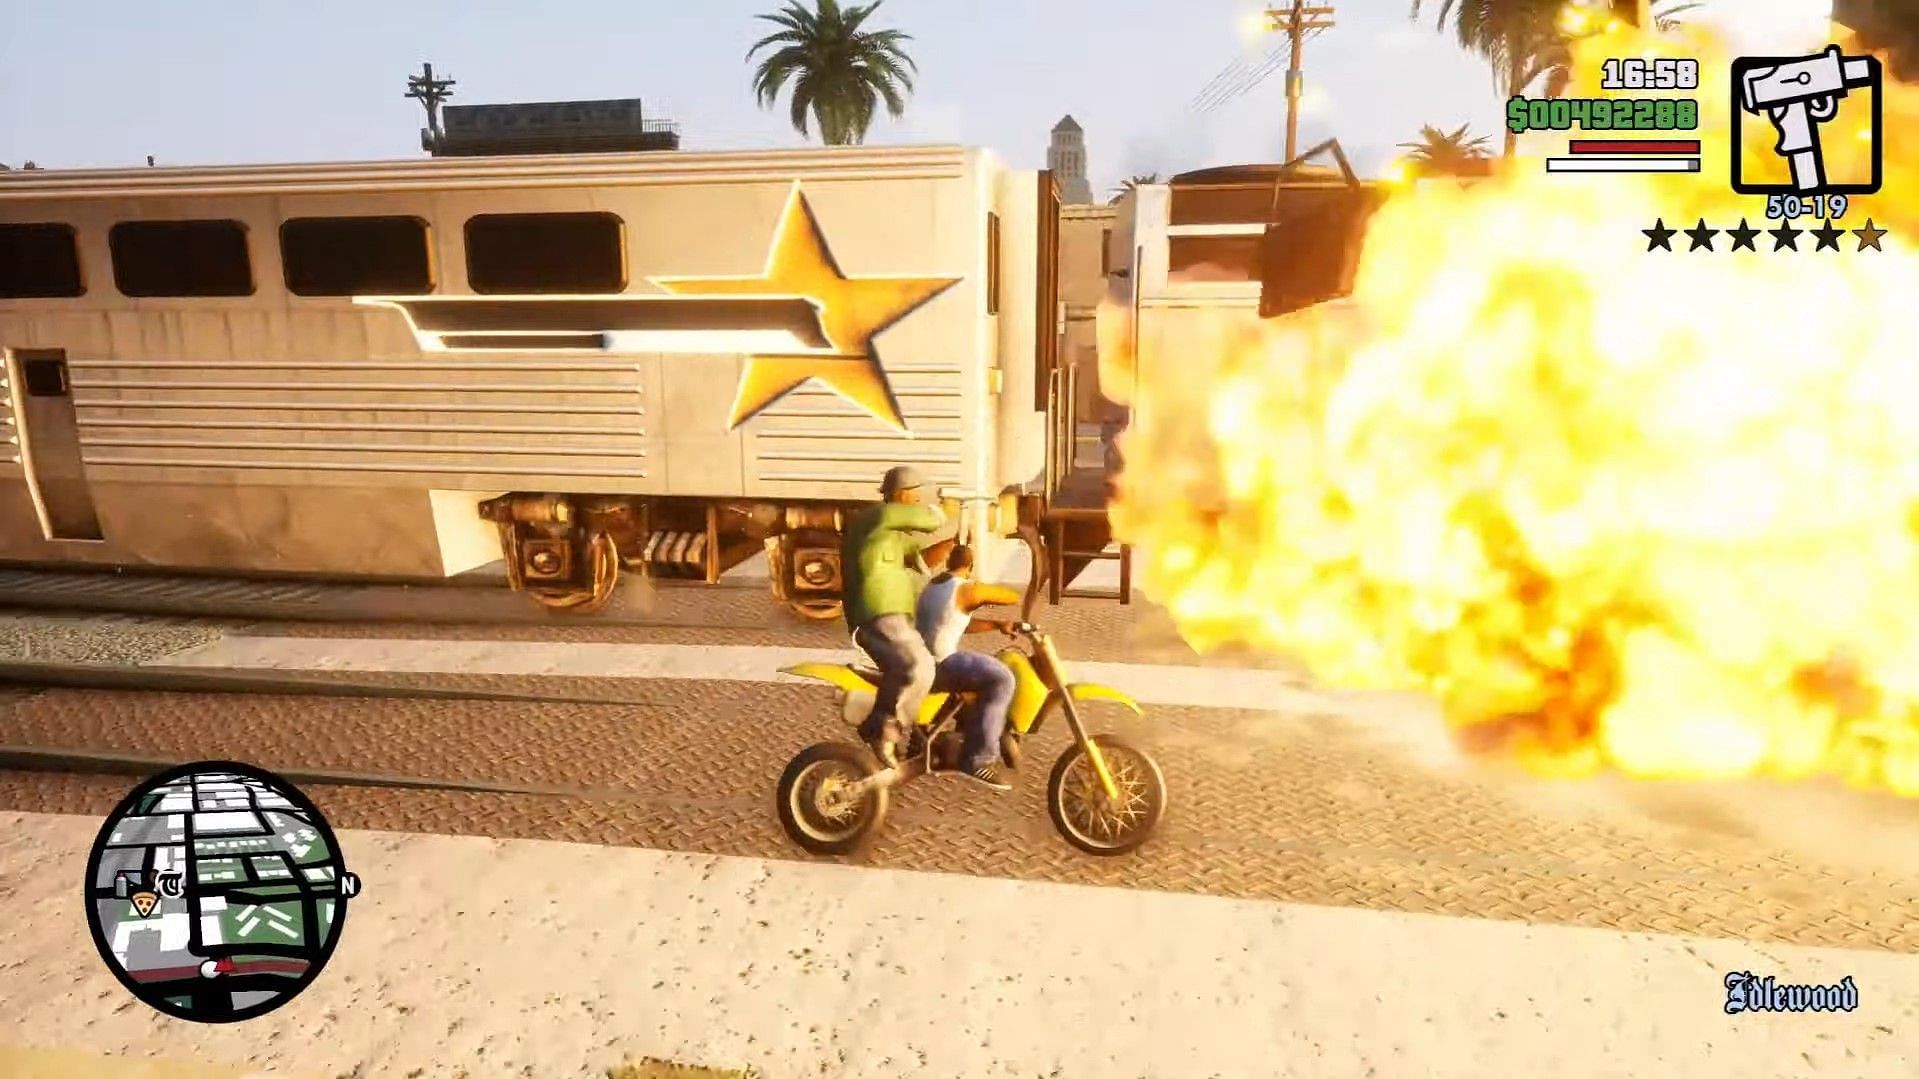 The scripted explosion, as it appears in the new game (Image via Rockstar Games)